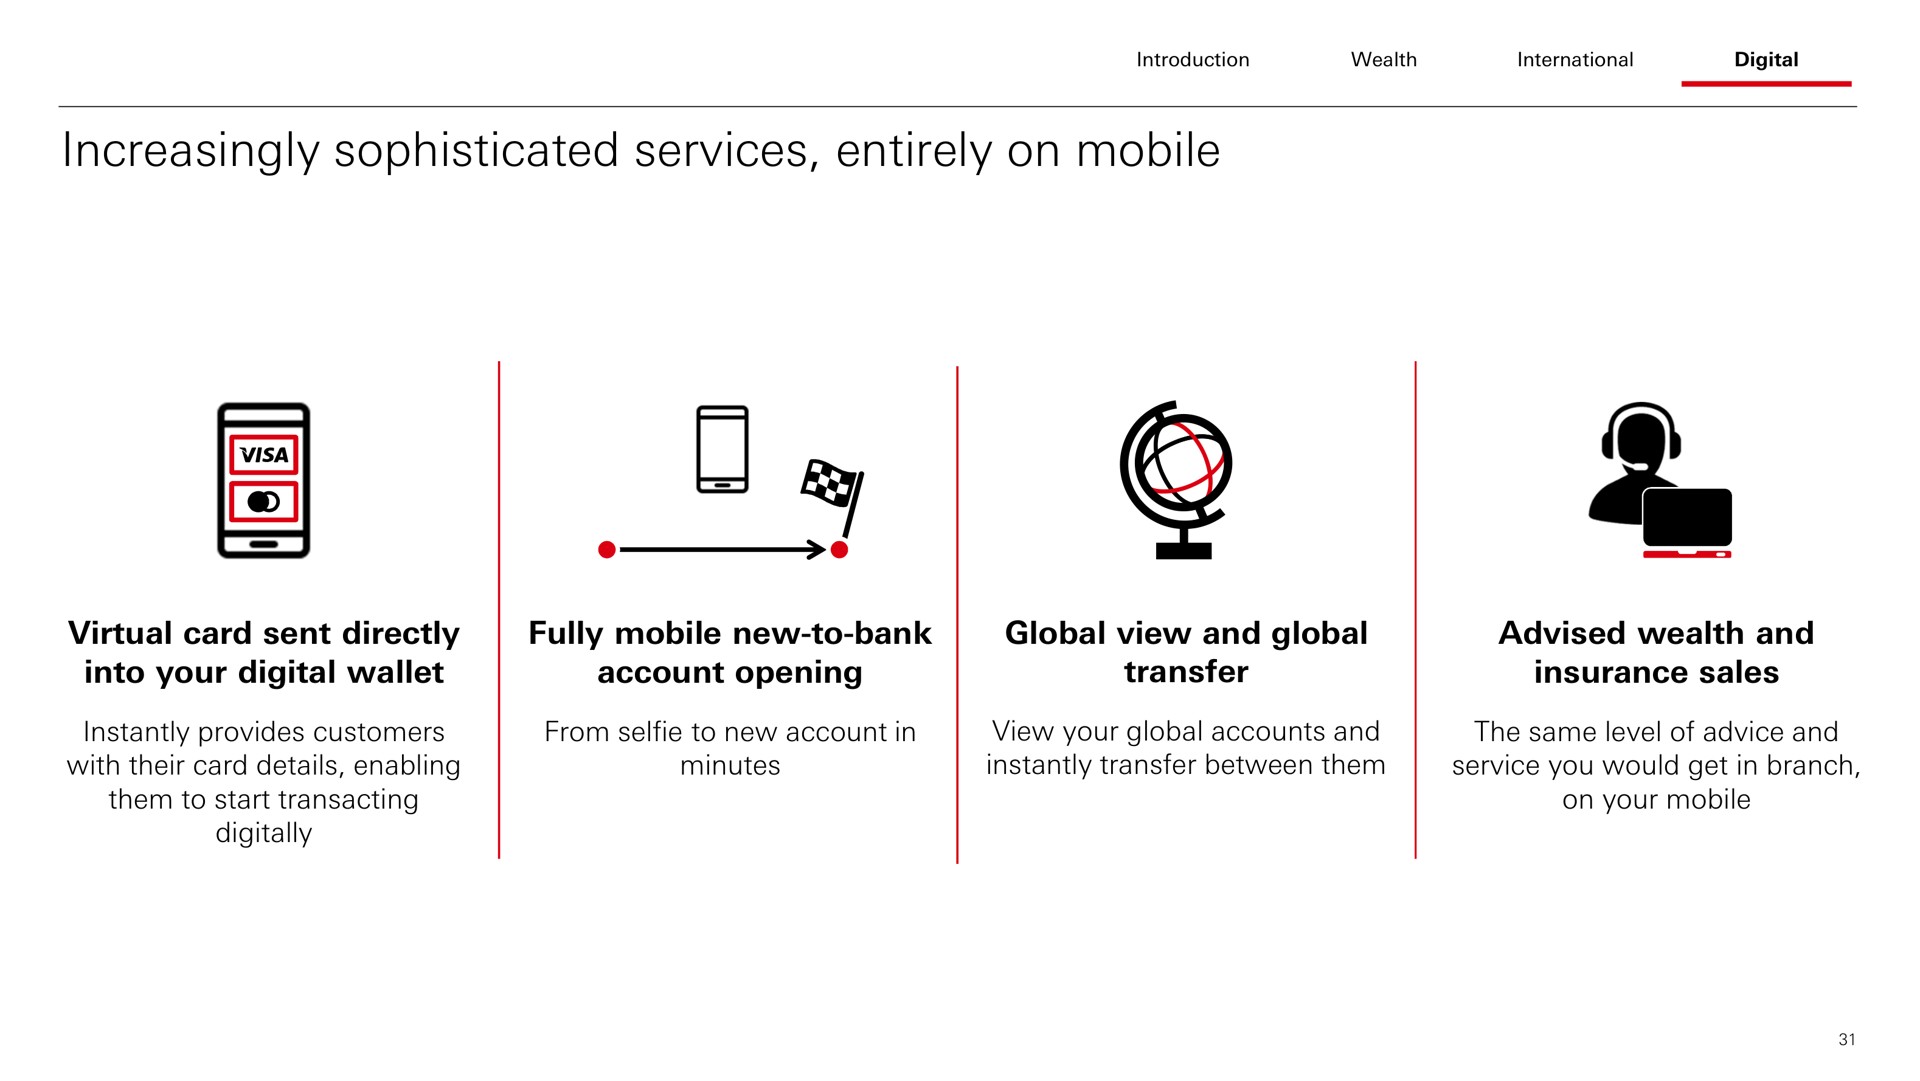 increasingly sophisticated services entirely on mobile cay | HSBC